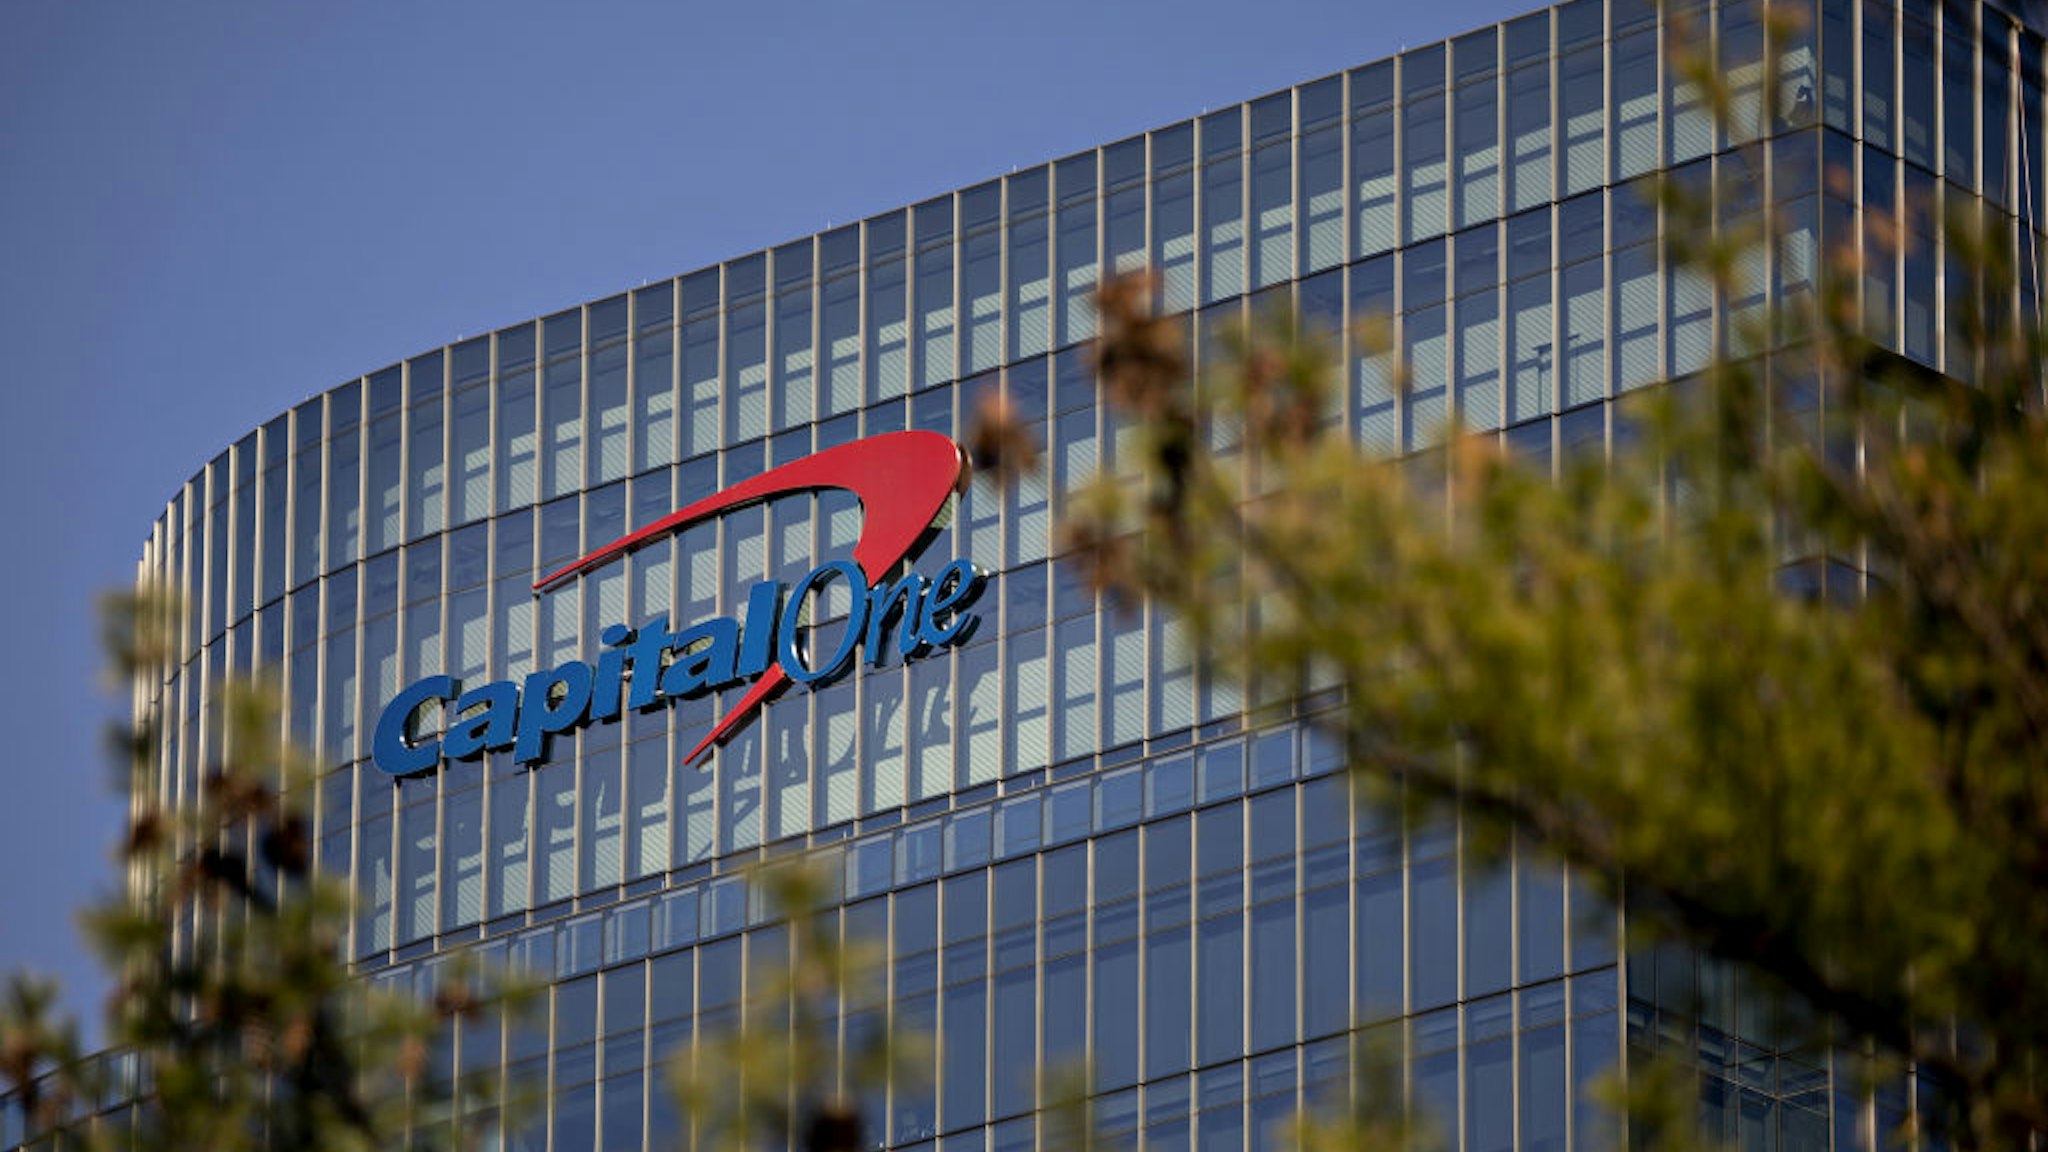 Signage is displayed at Capital One Financial Corp. headquarters in McLean, Virginia, U.S., on Wednesday, Nov. 6, 2019. Capital One's July 29 disclosure of a data breach exposed the company to regulatory fines and lawsuits, which could cost more than $200 million according to Bloomberg Intelligence.